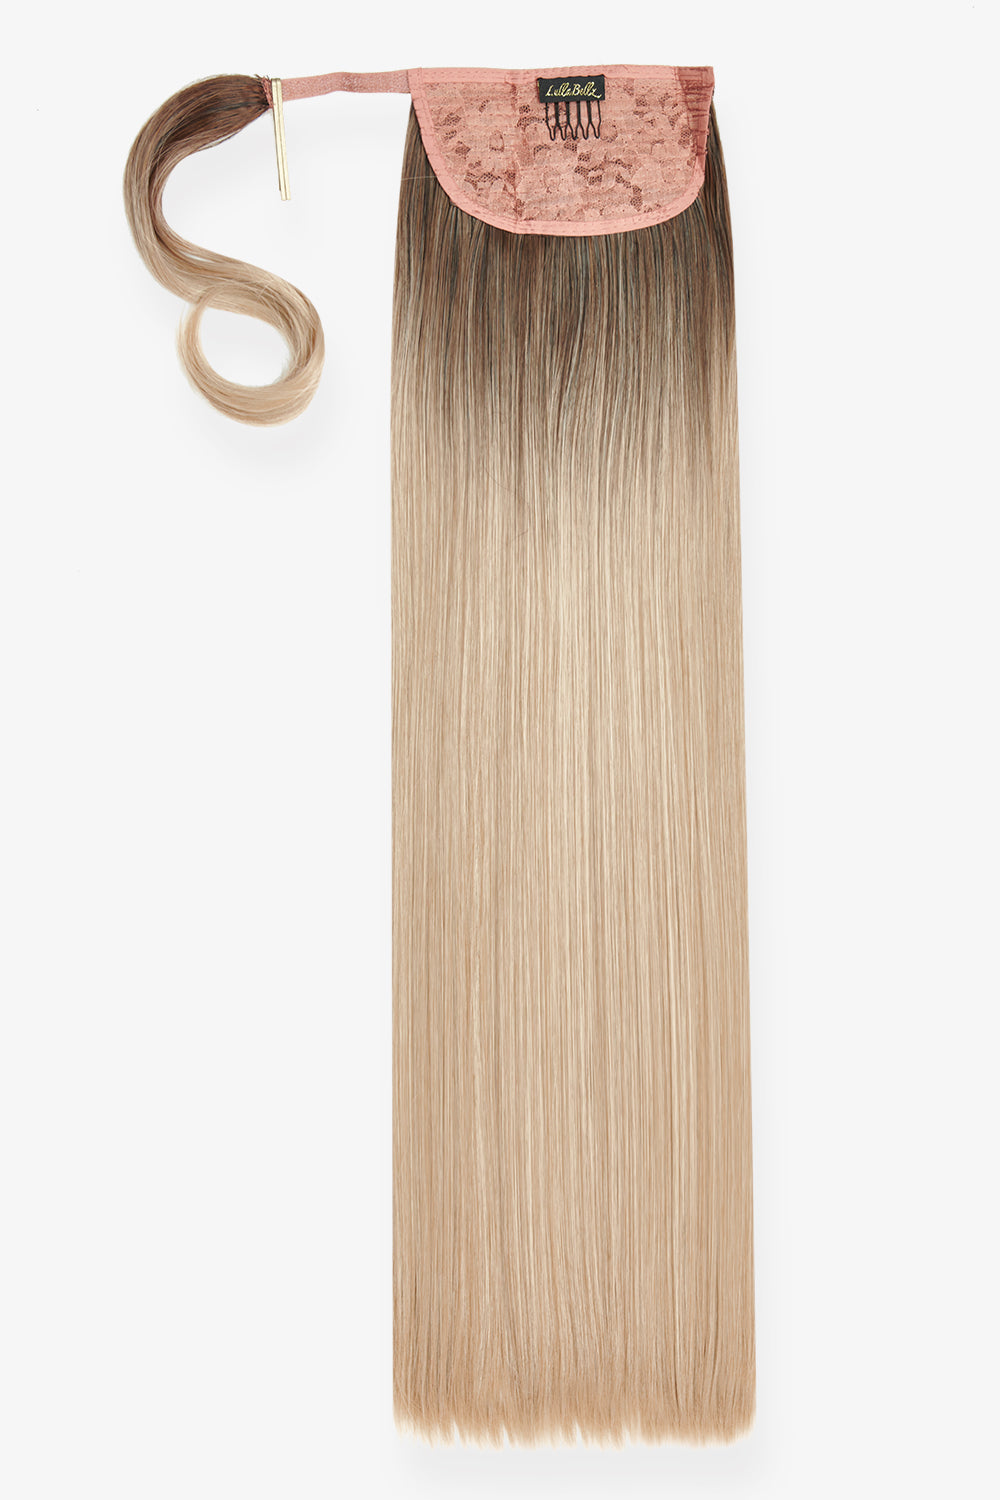 Grande Lengths 26" Straight Wraparound Ponytail - Rooted California Blonde